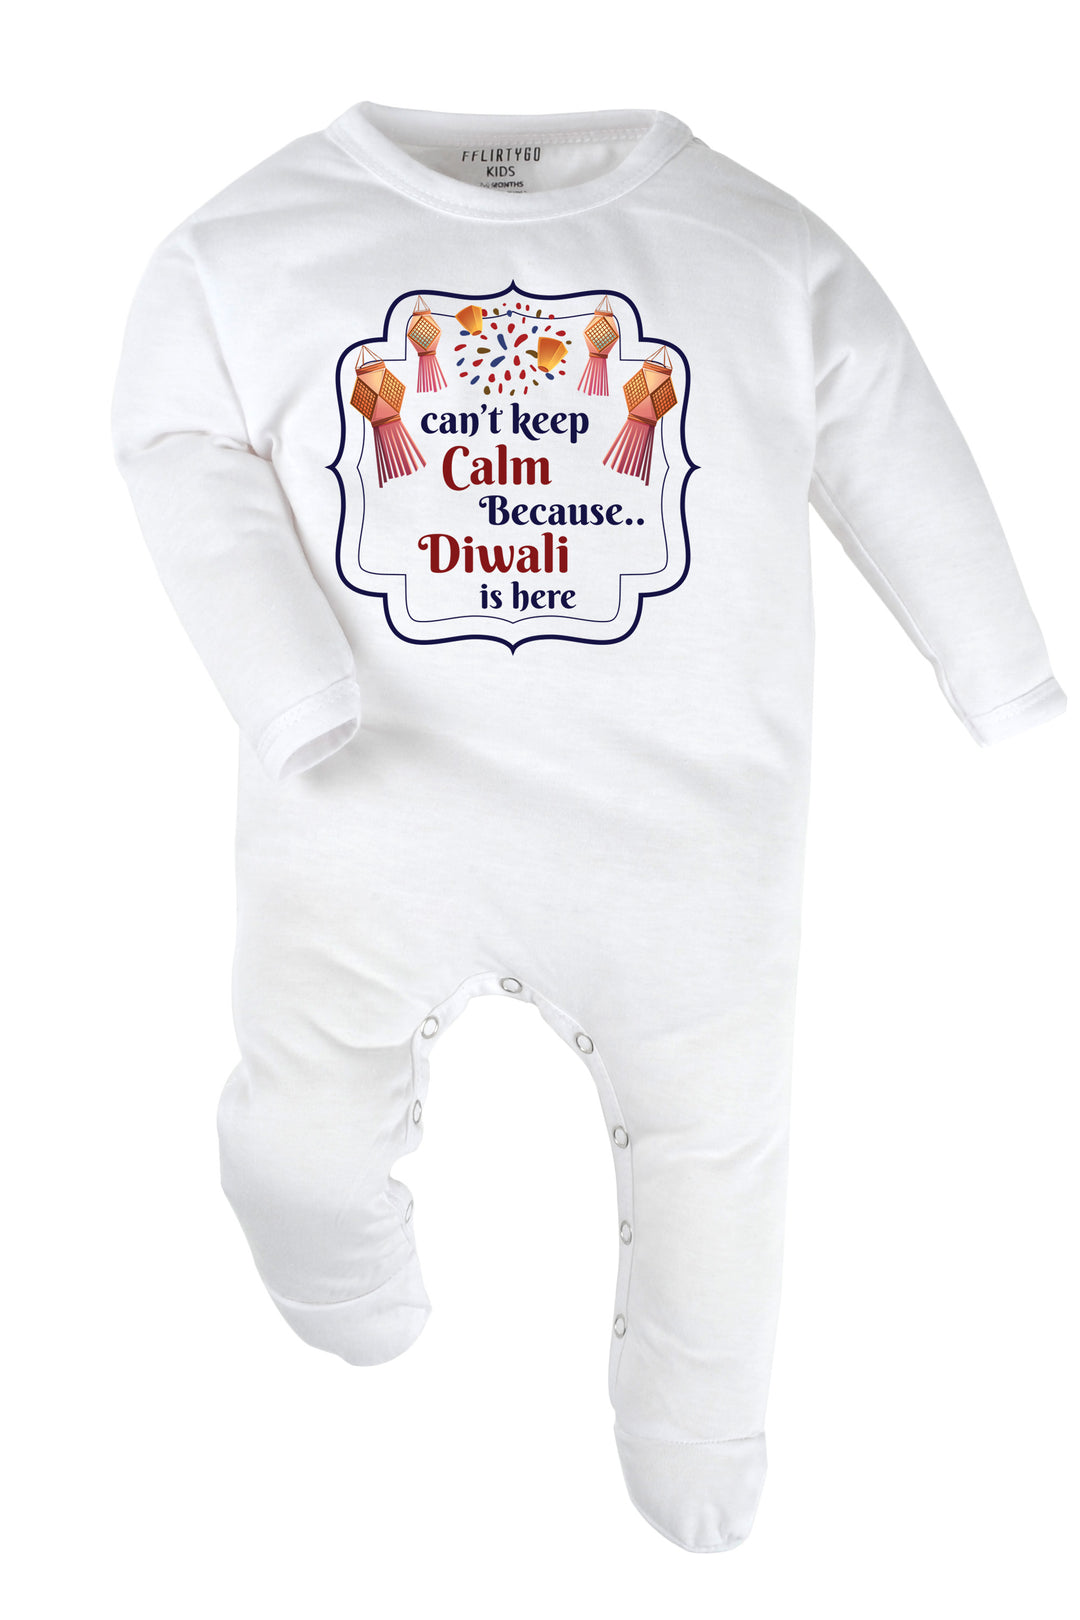 Can't Keep Calm Because Diwali Is Here Baby Romper | Onesies